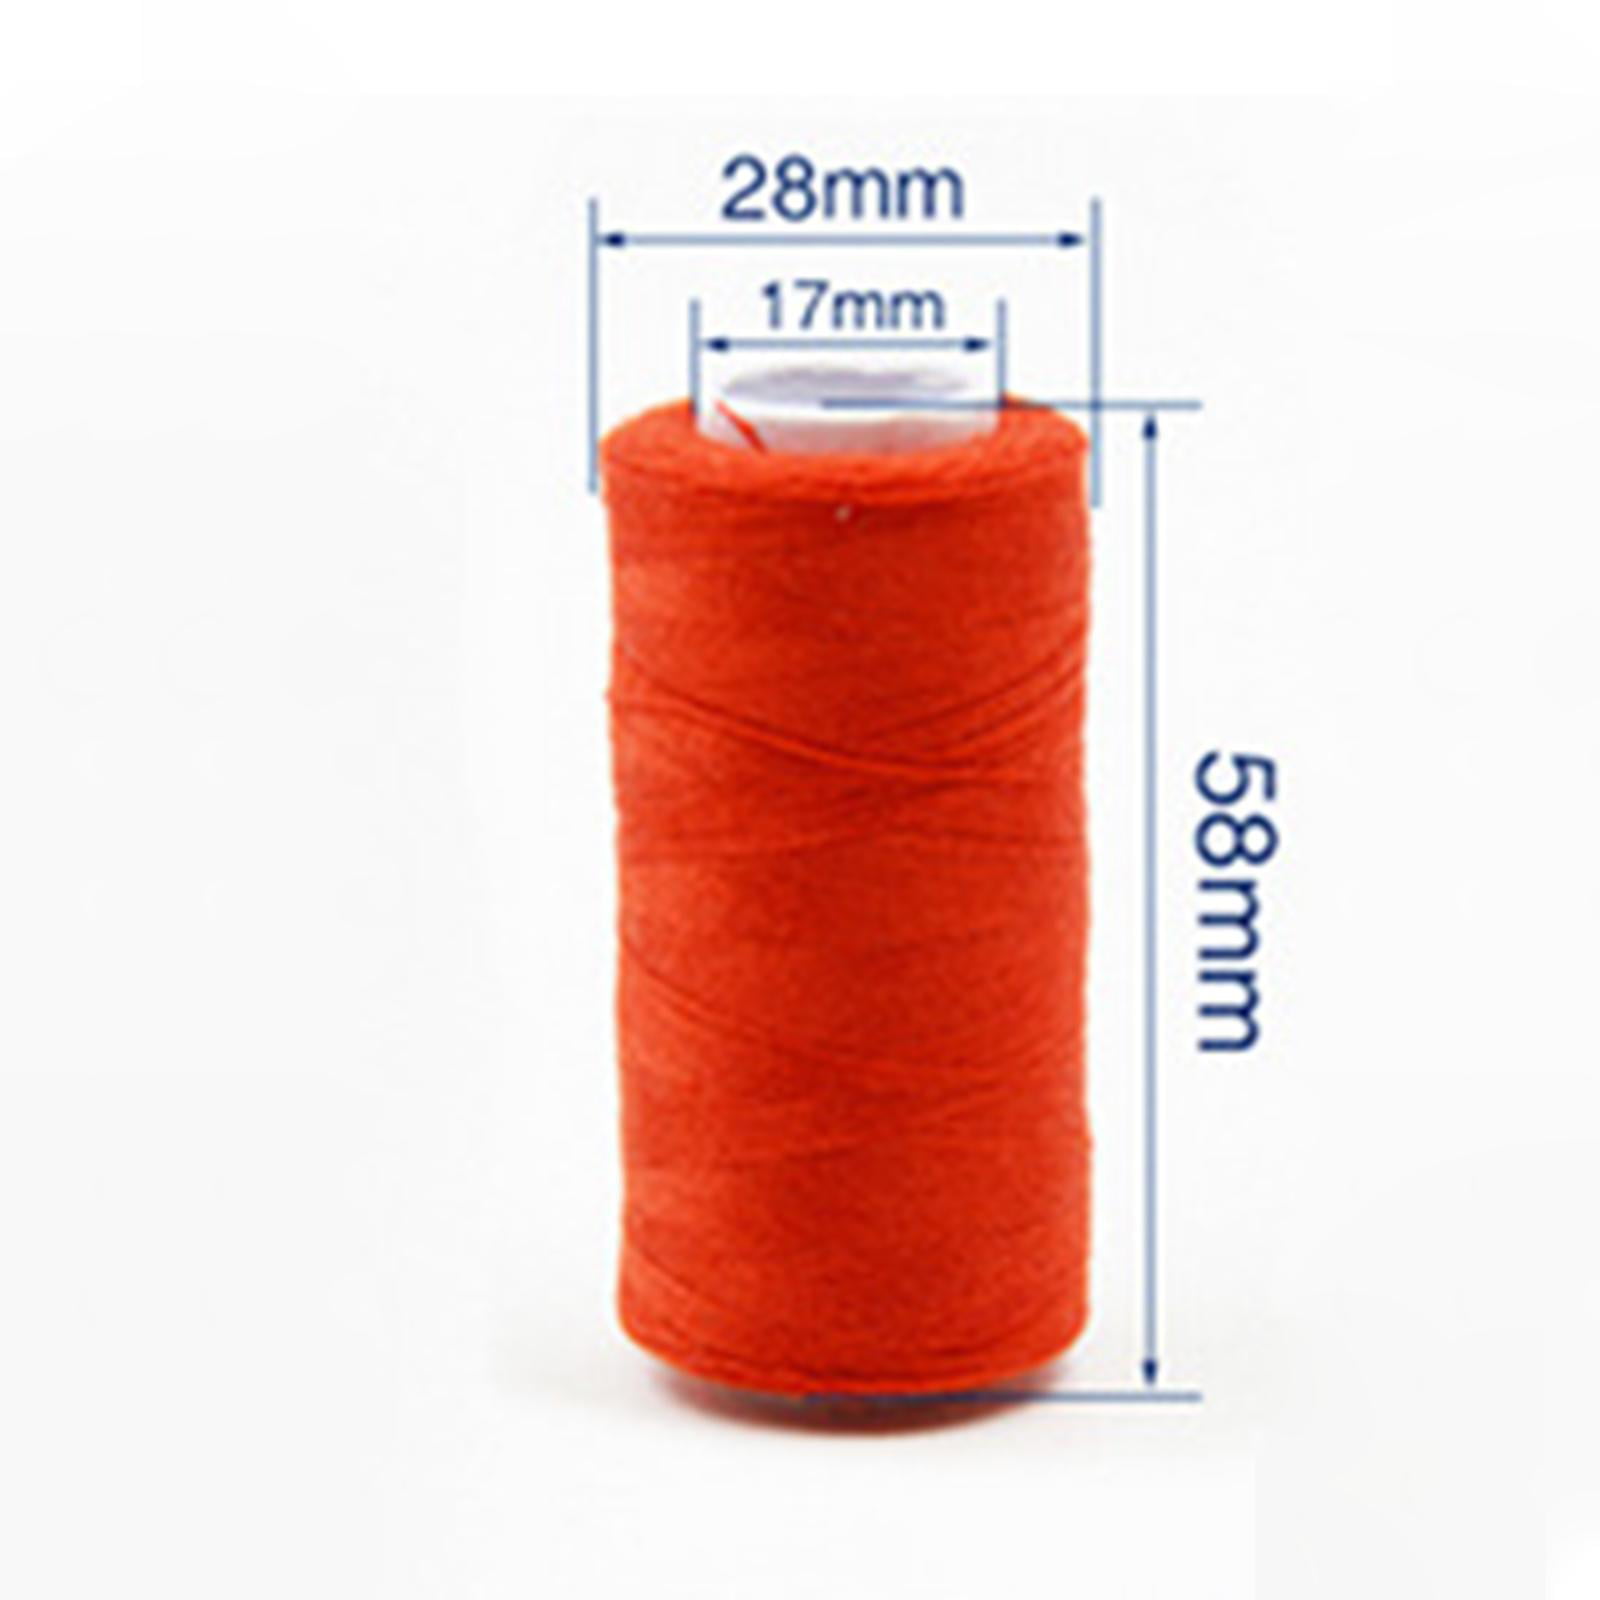 15Pcs Jeans Shoes Bags Strong Thick Thread Spools Sewing Tools with 14 